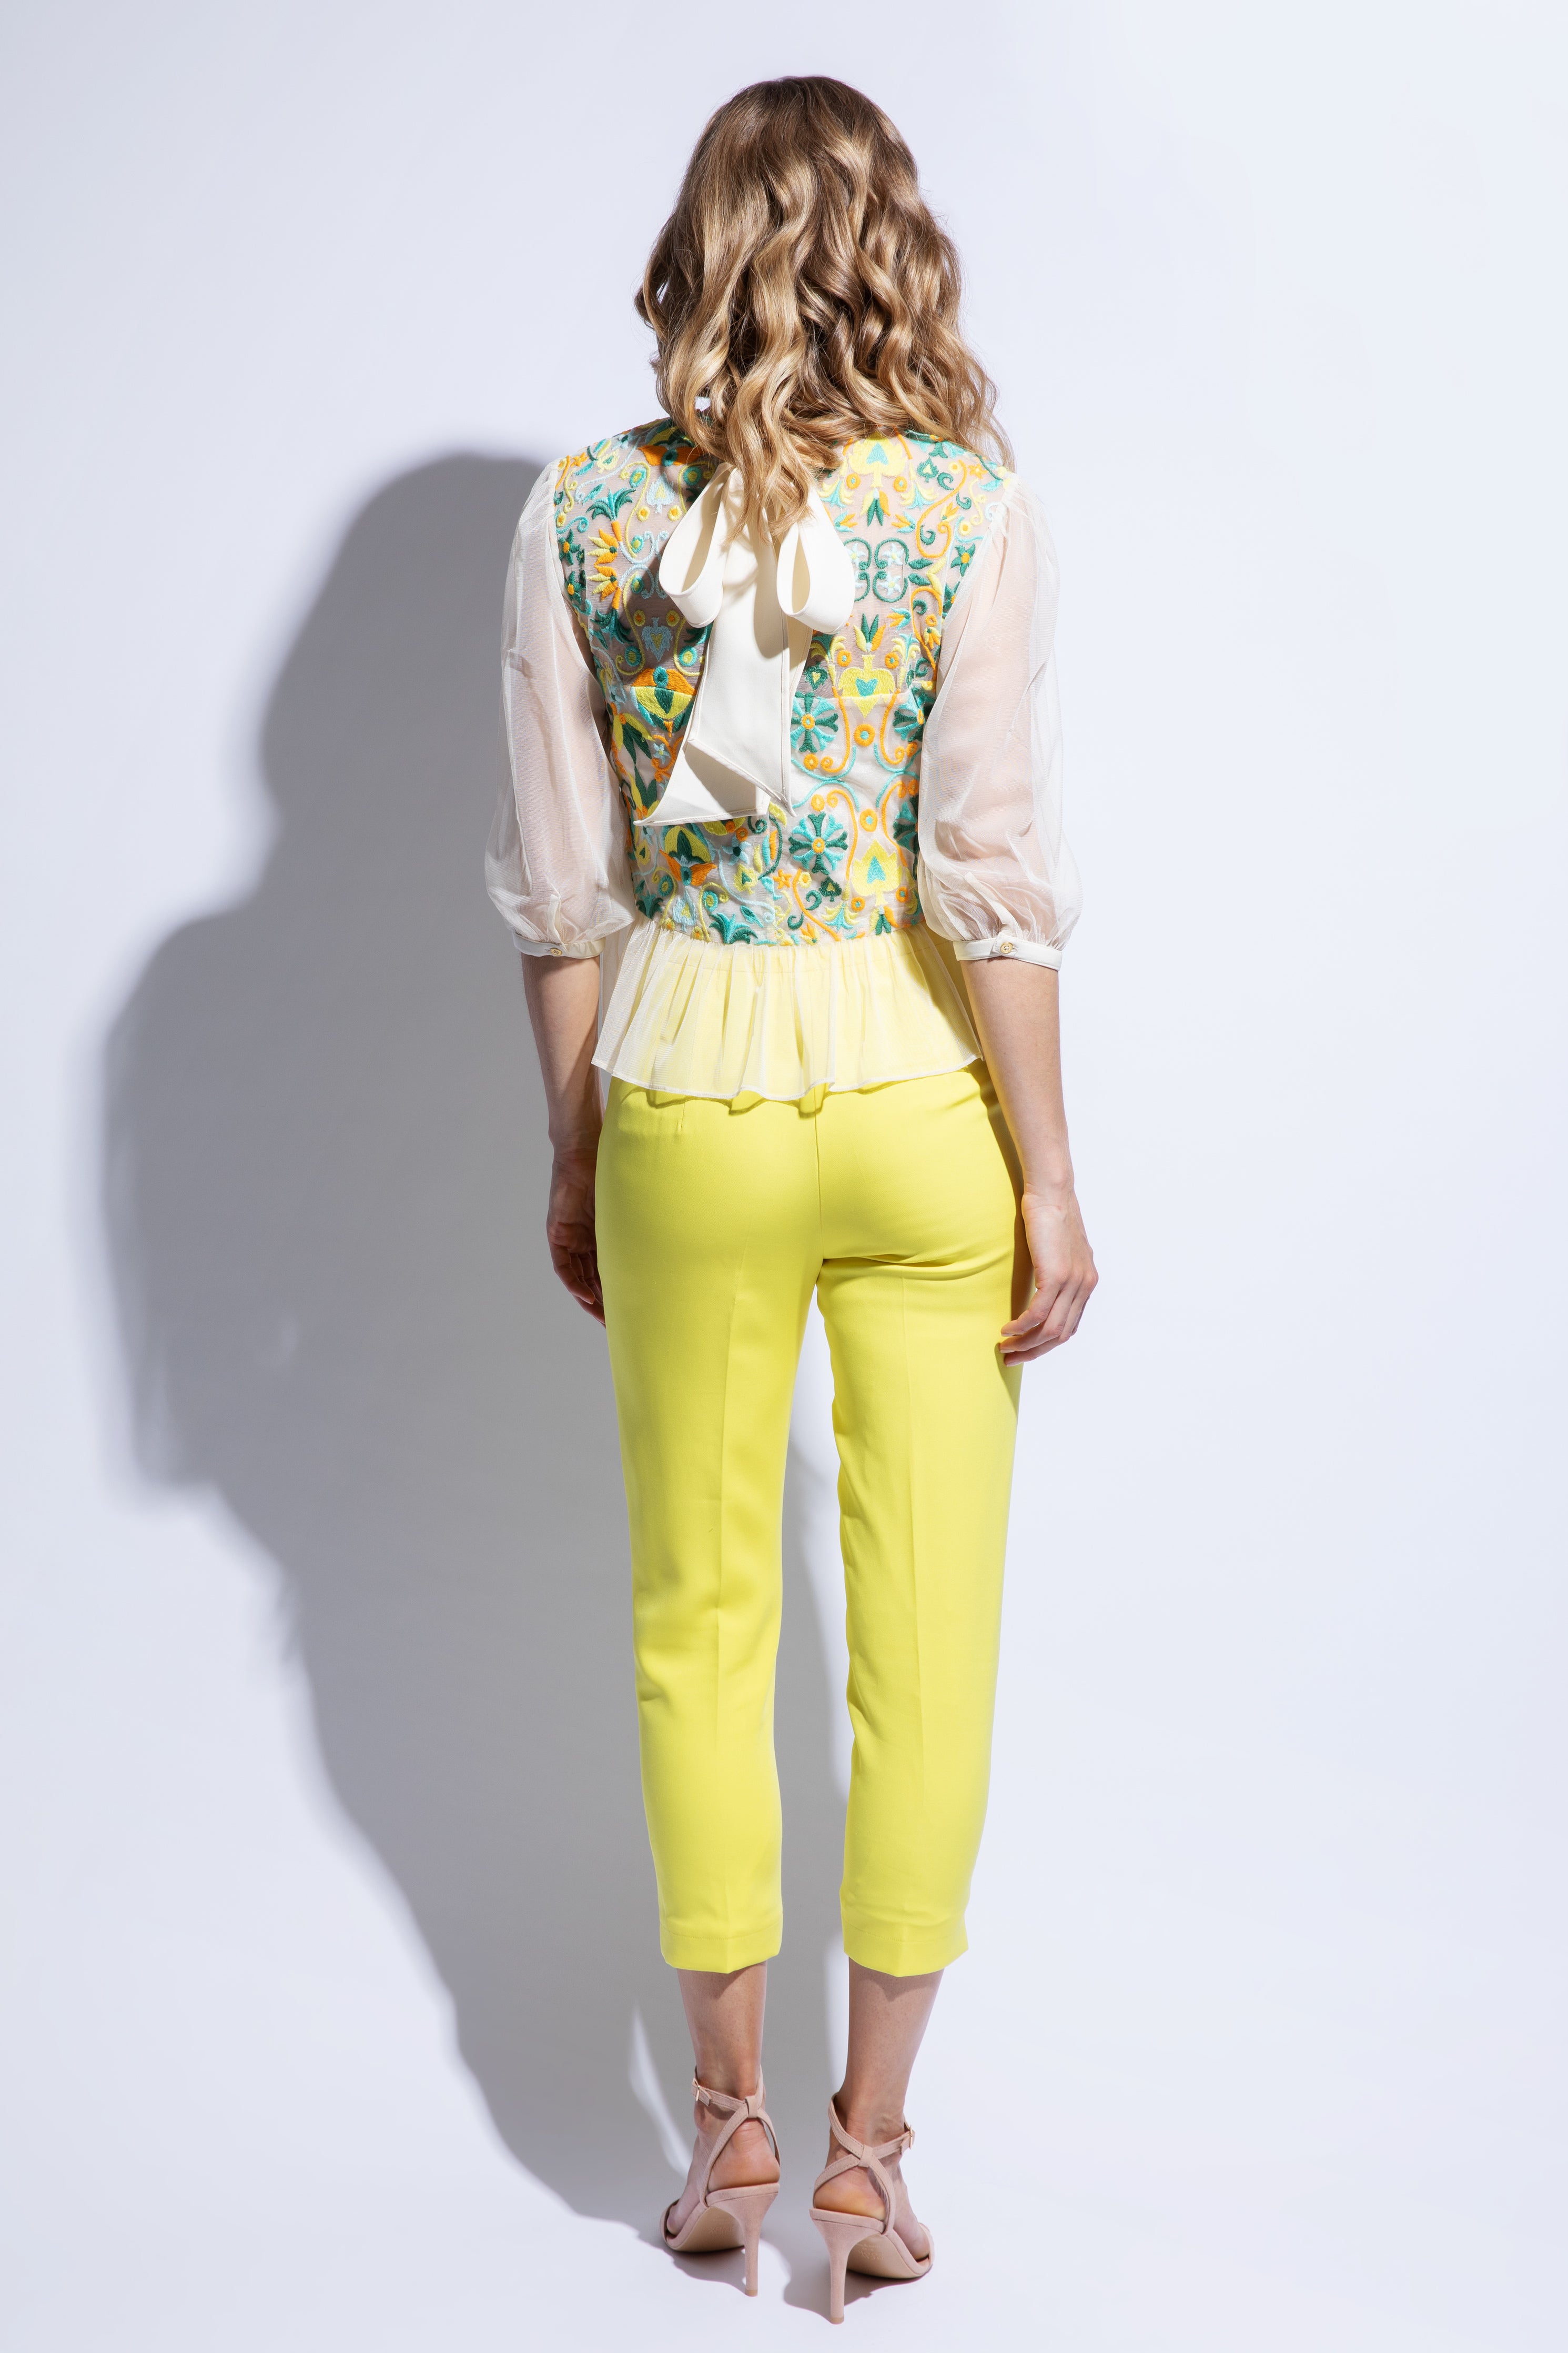 Back view of sheer embroidered and colourful top with fitted yellow trouser and bow detail